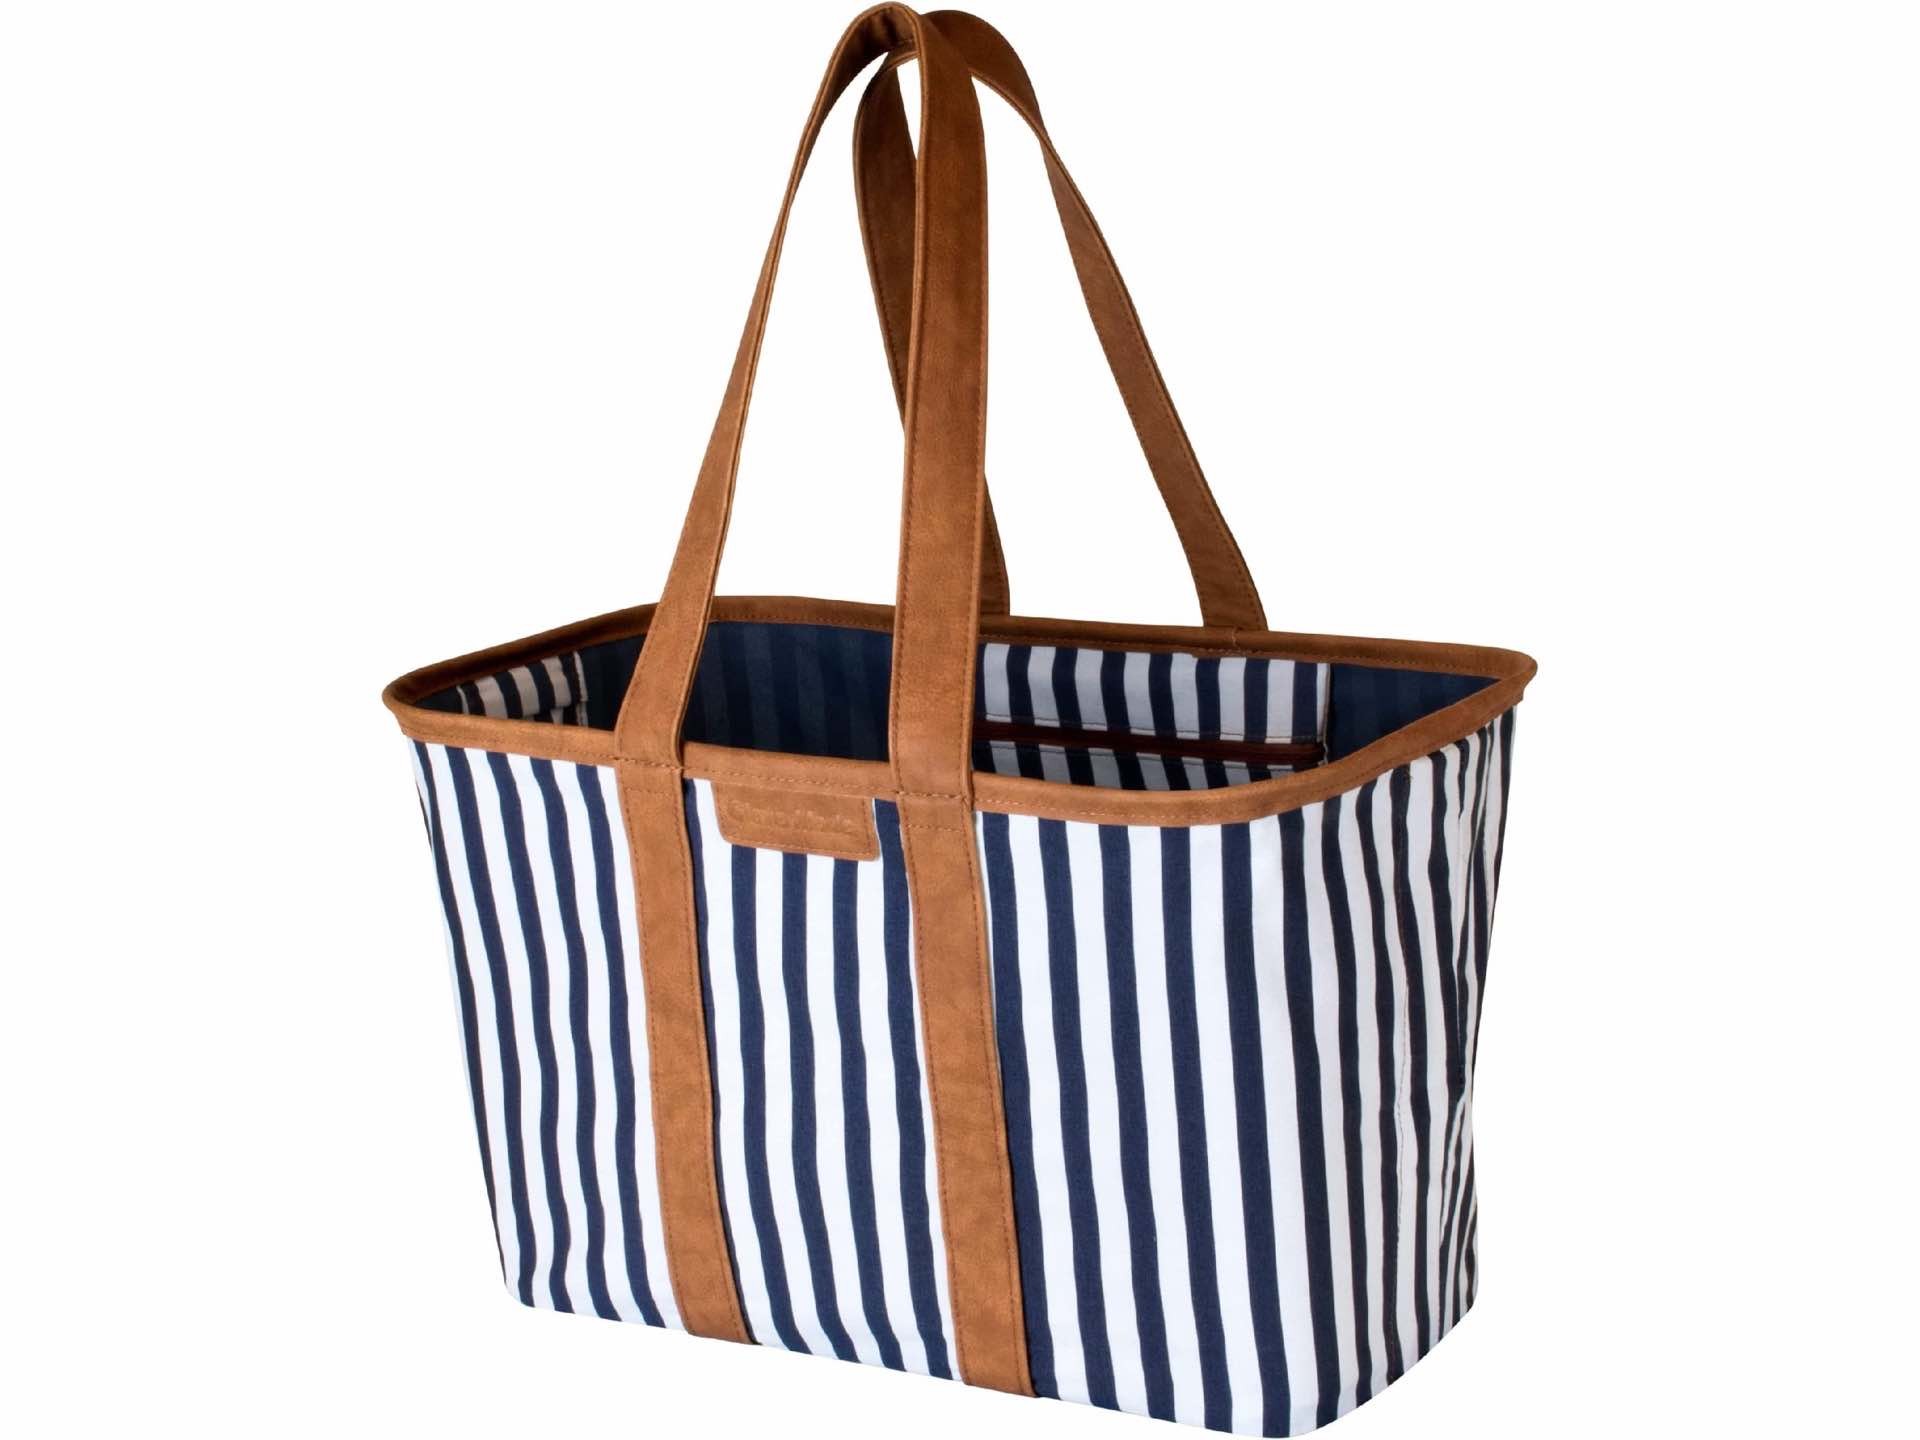 CleverMade “SnapBasket LUXE” Collapsible Tote Bag